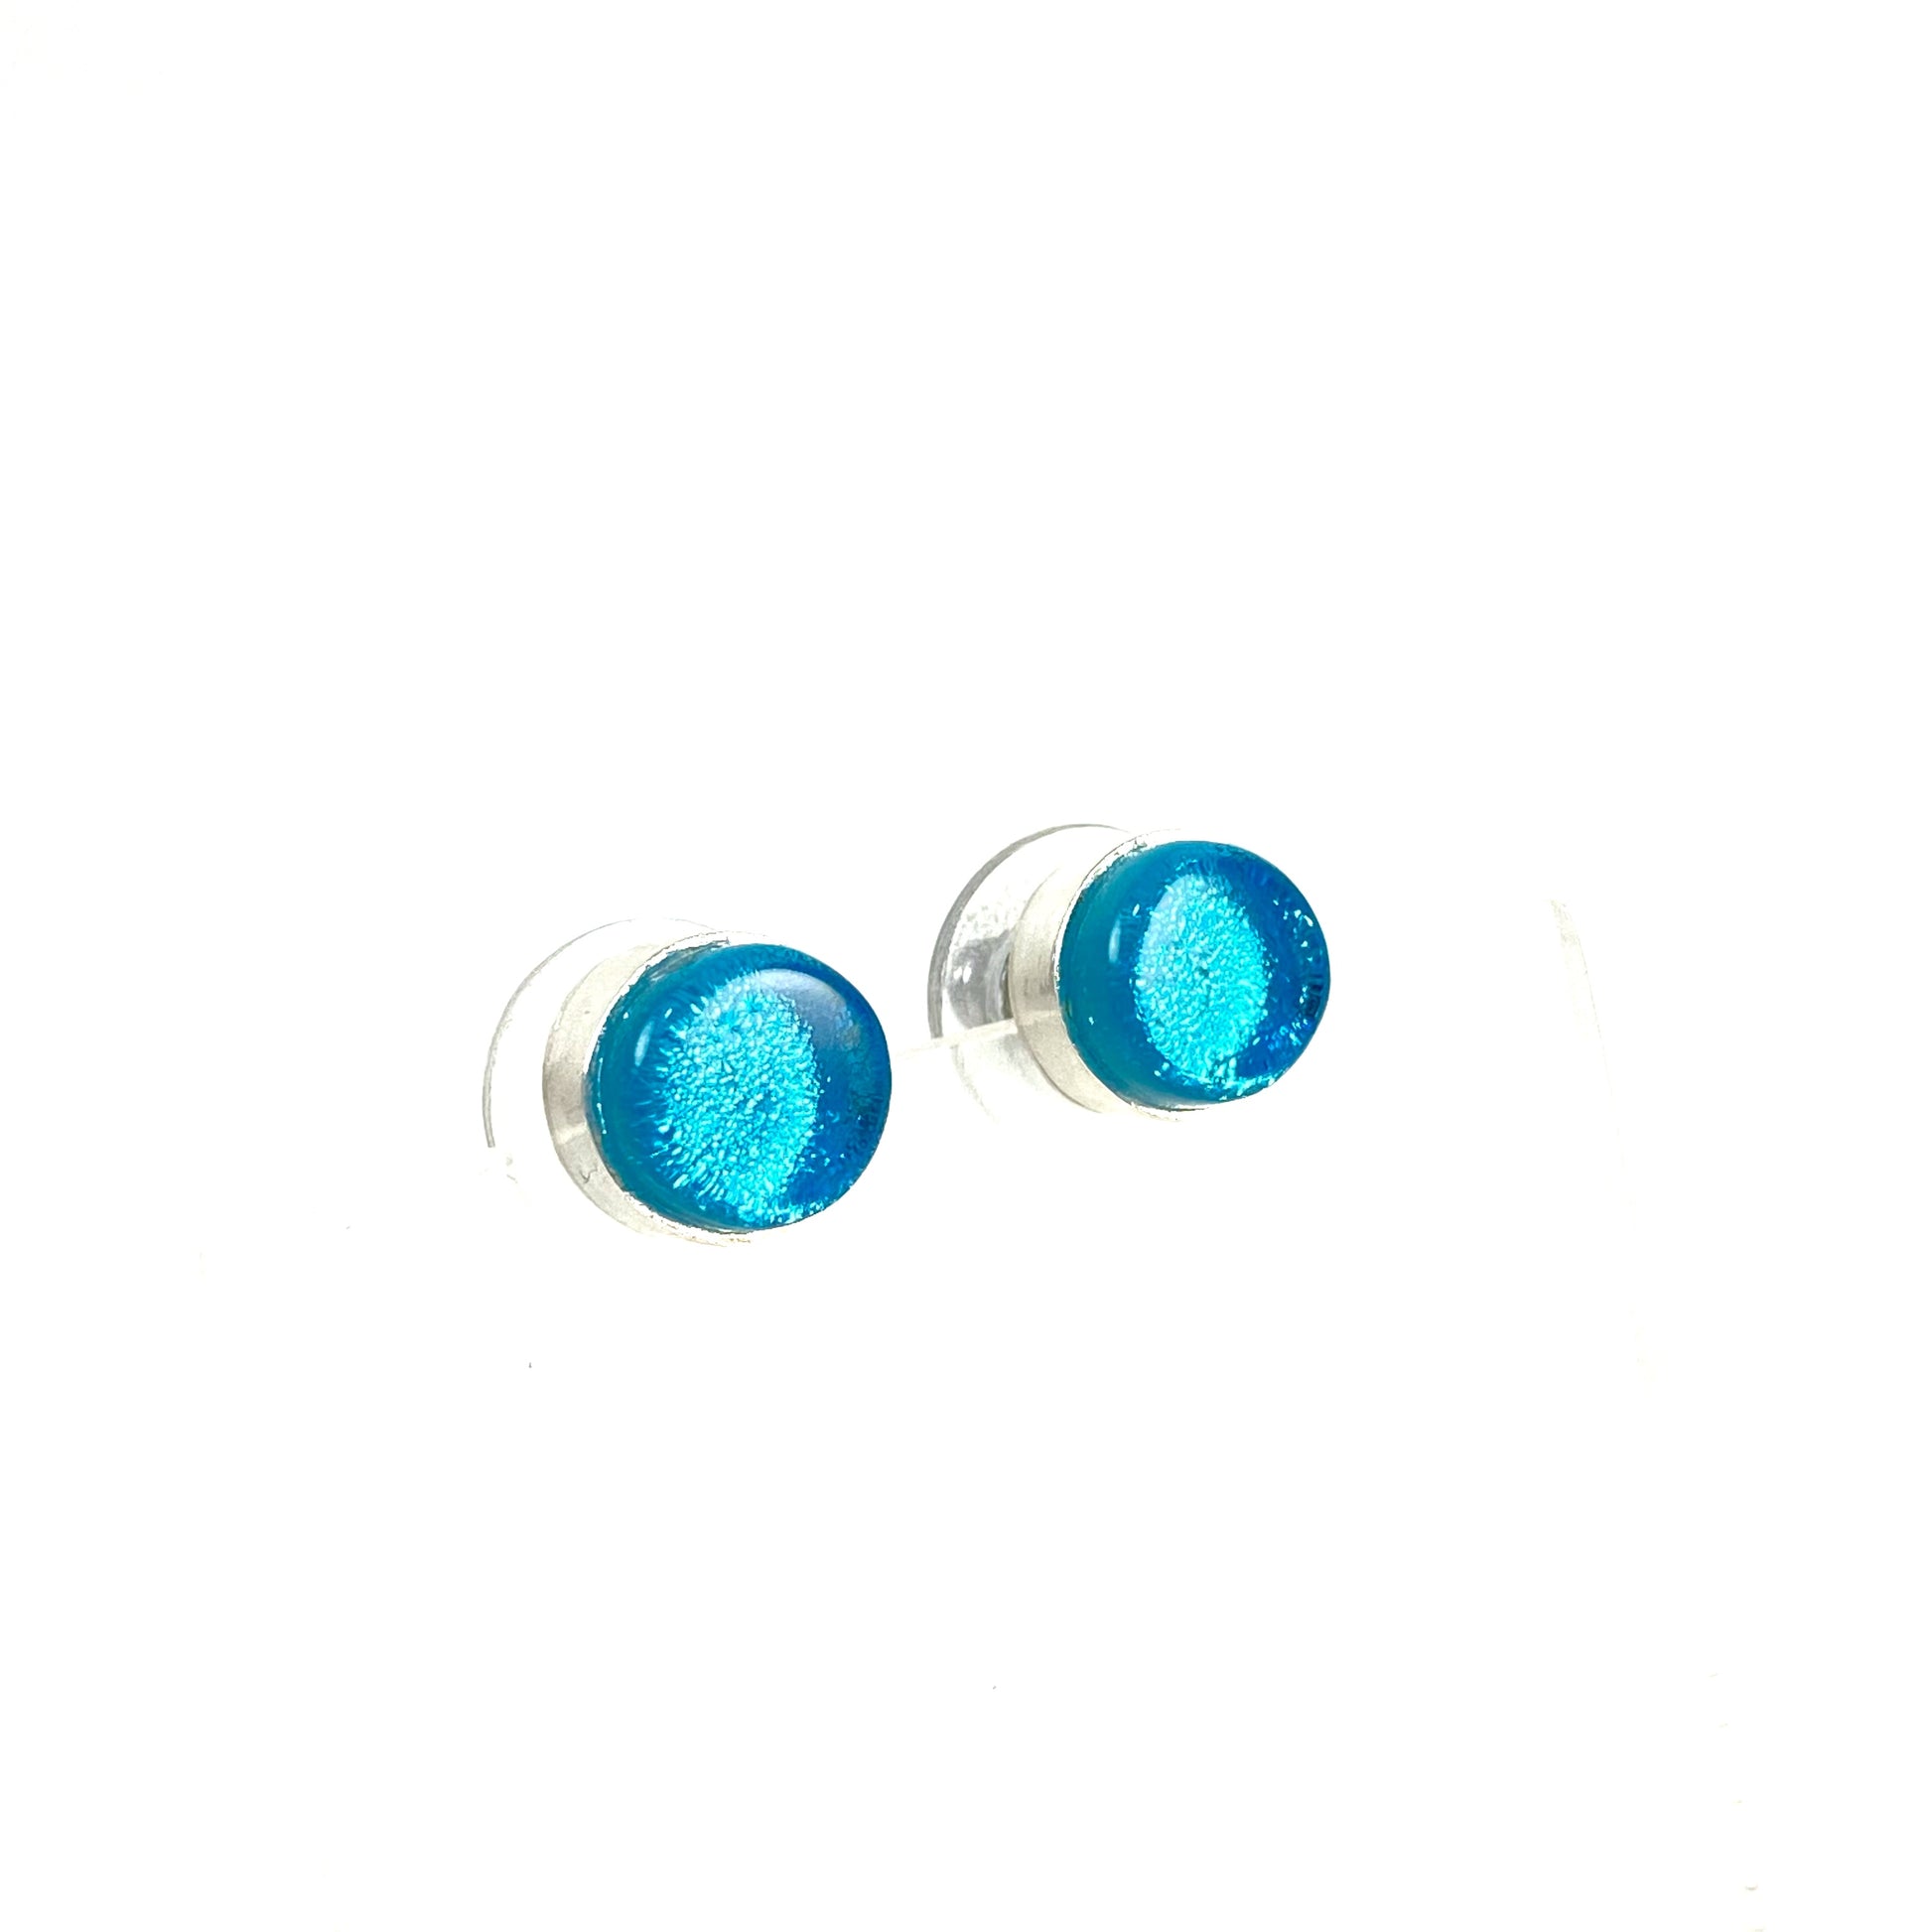 Circle post earrings in silver blue glass, fused glass, glass jewelry, glass and silver jewelry, handmade, handcrafted, American Craft, hand fabricated jewelry, hand fabricated jewellery, Athen, Georgia, colorful jewelry, sparkle, bullseye glass, dichroic glass, art jewelry